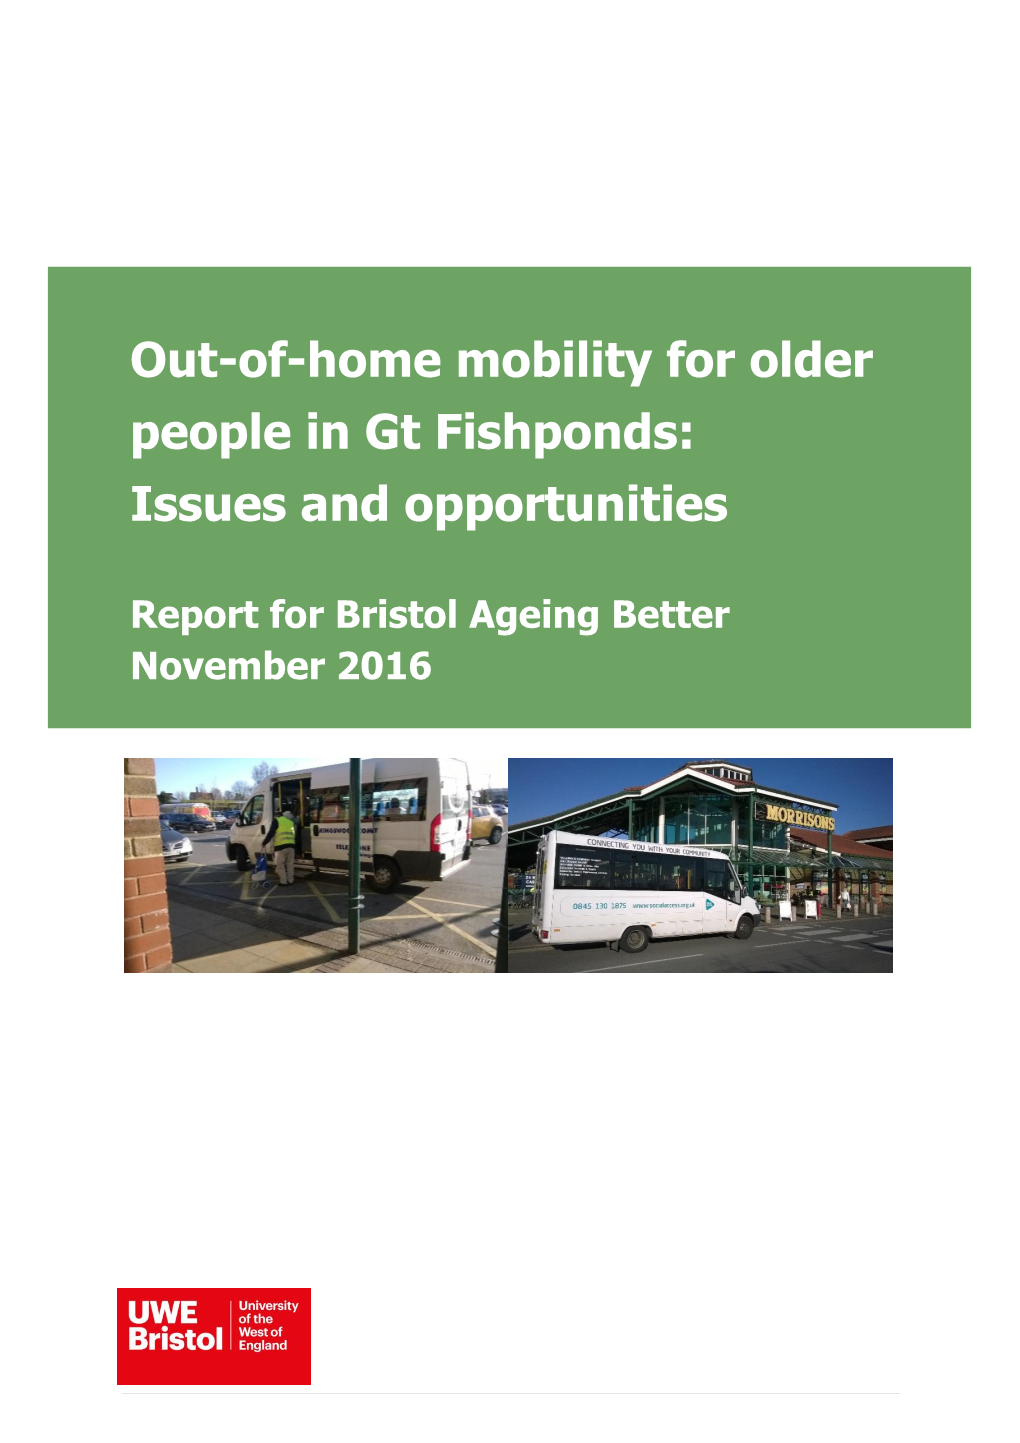 Out-Of-Home Mobility for Older People in Gt Fishponds: Issues and Opportunities